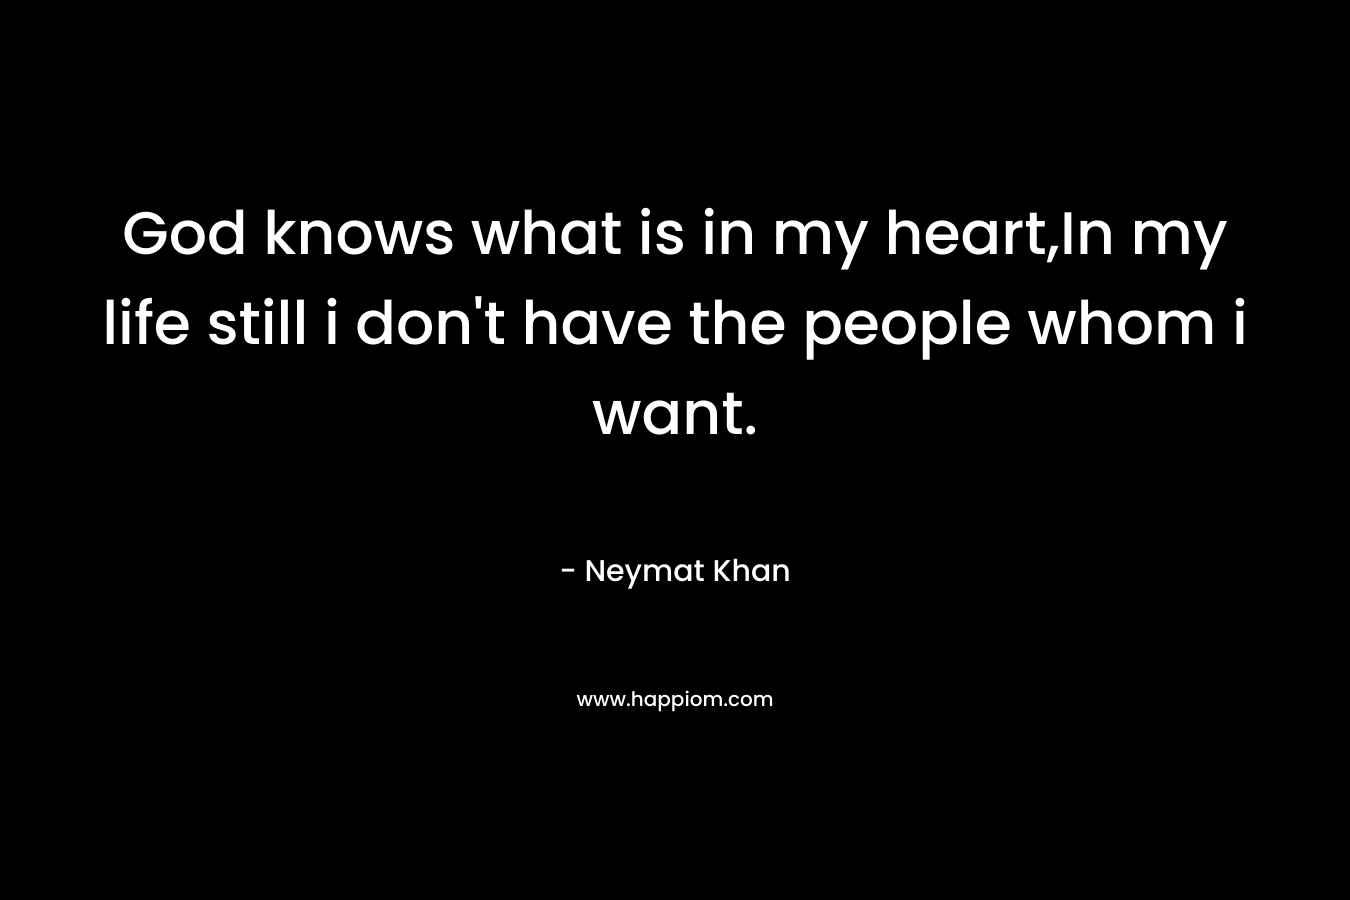 God knows what is in my heart,In my life still i don't have the people whom i want.